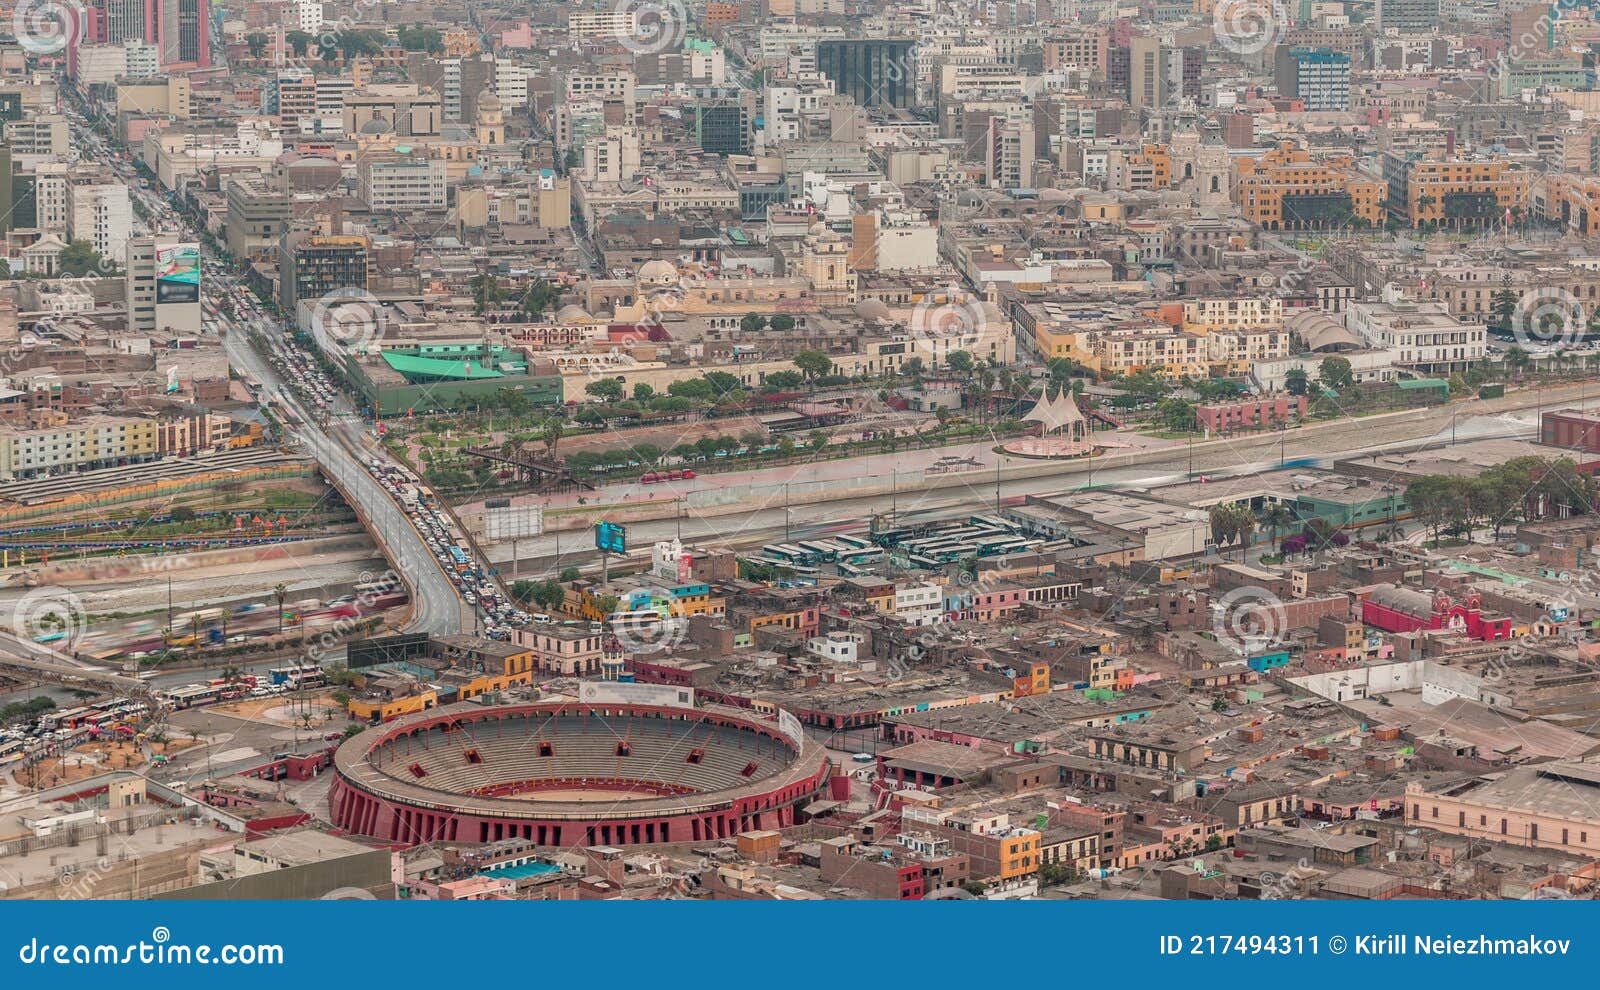 aerial view of lima skyline timelapse with plaza de toros de acho bullring from san cristobal hill.